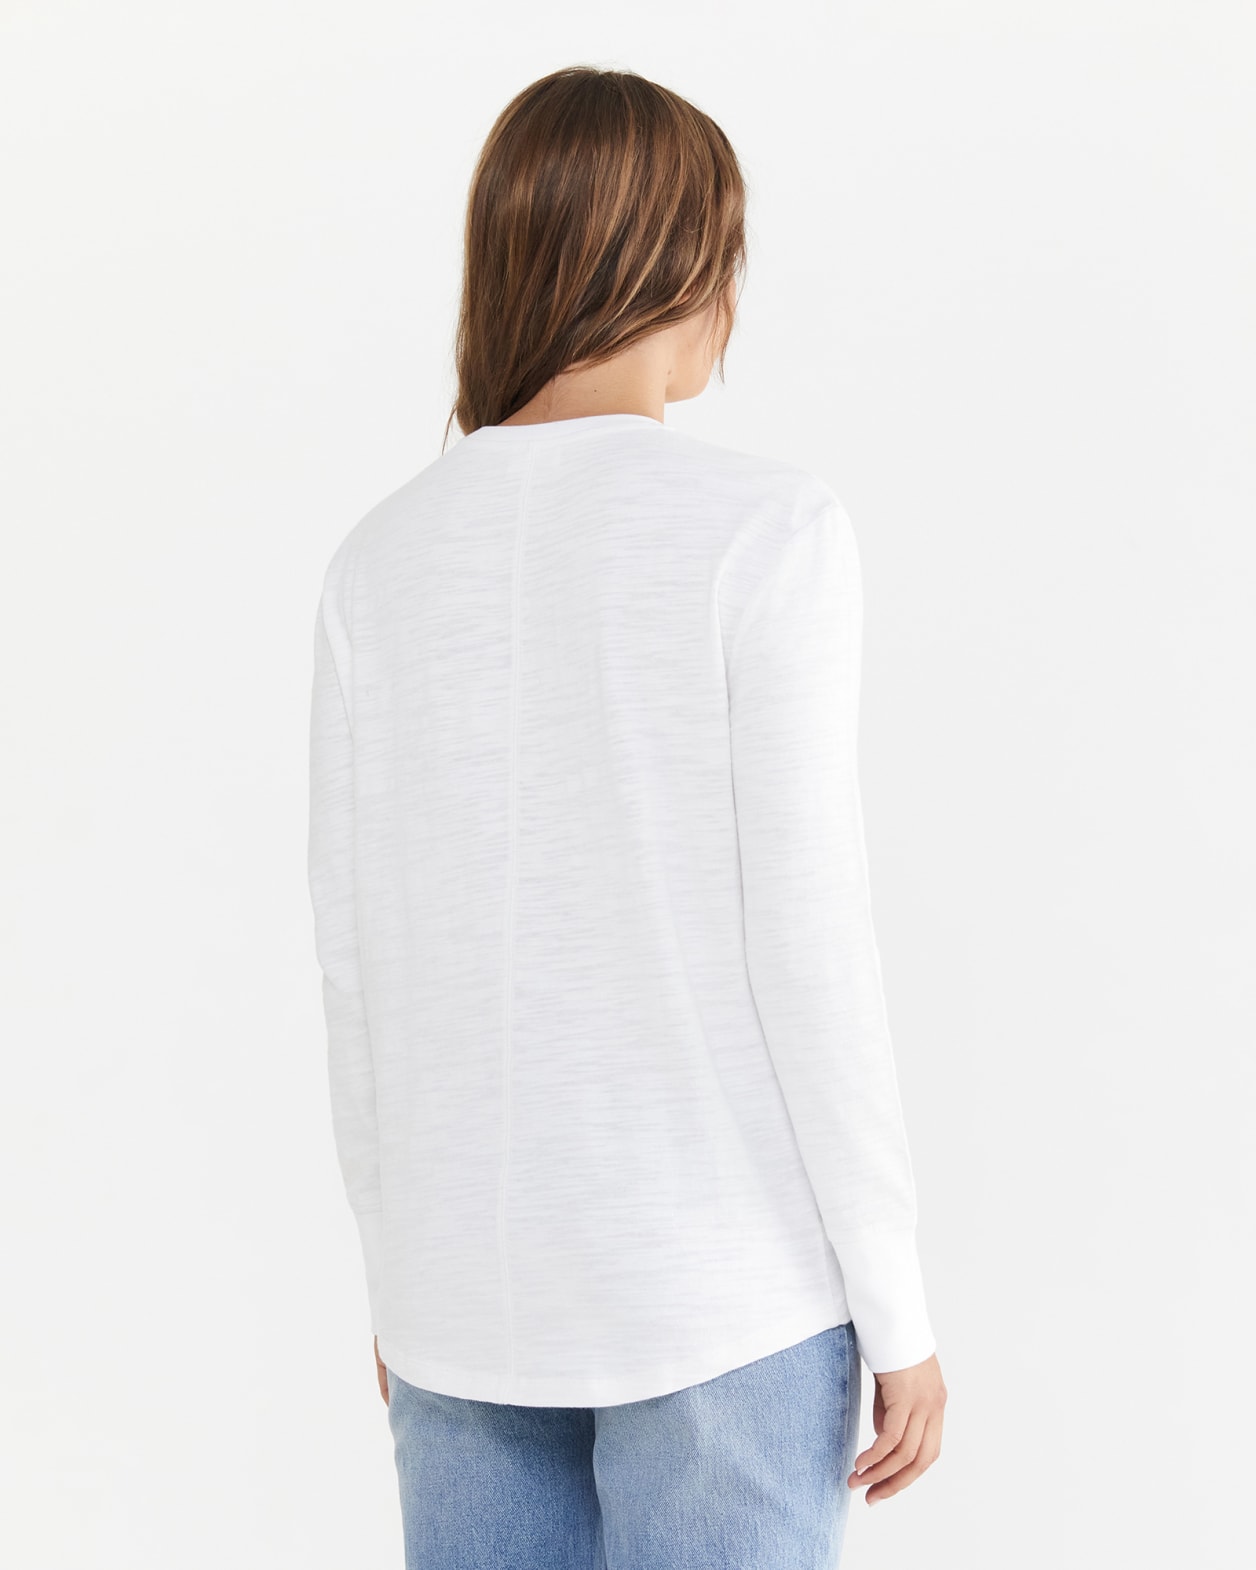 Cora Cotton Boxy Long Sleeve Tee in WHITE